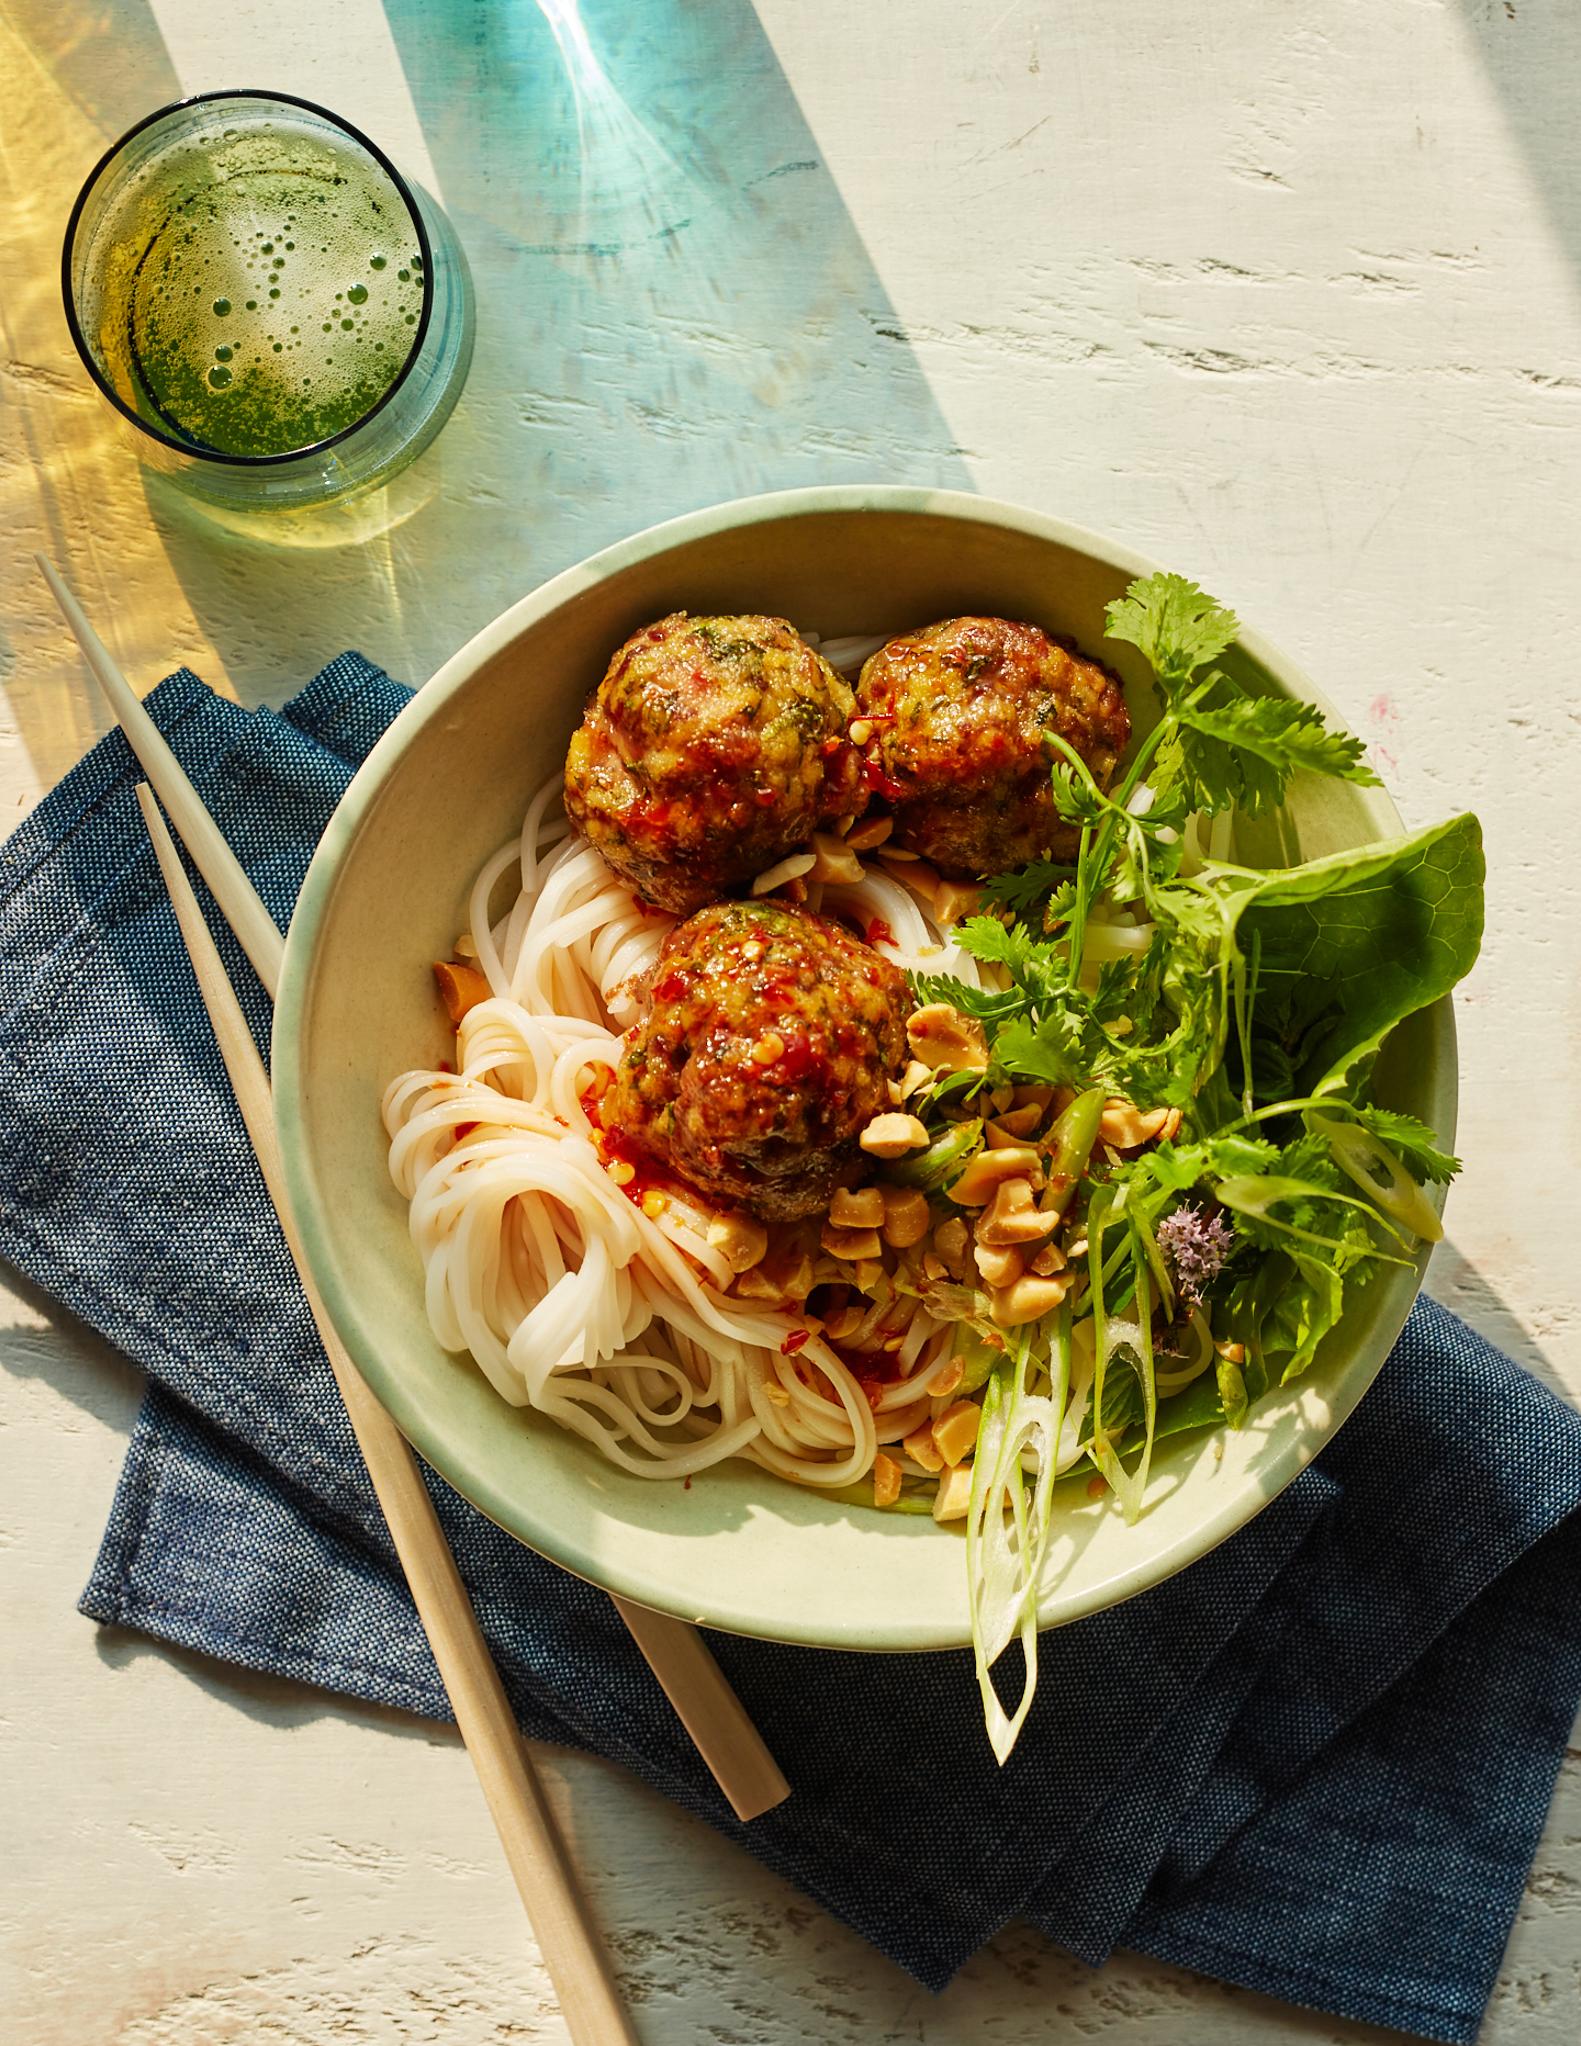  These succulent meatballs are just waiting to be glazed in a tangy ginger-lime sauce.